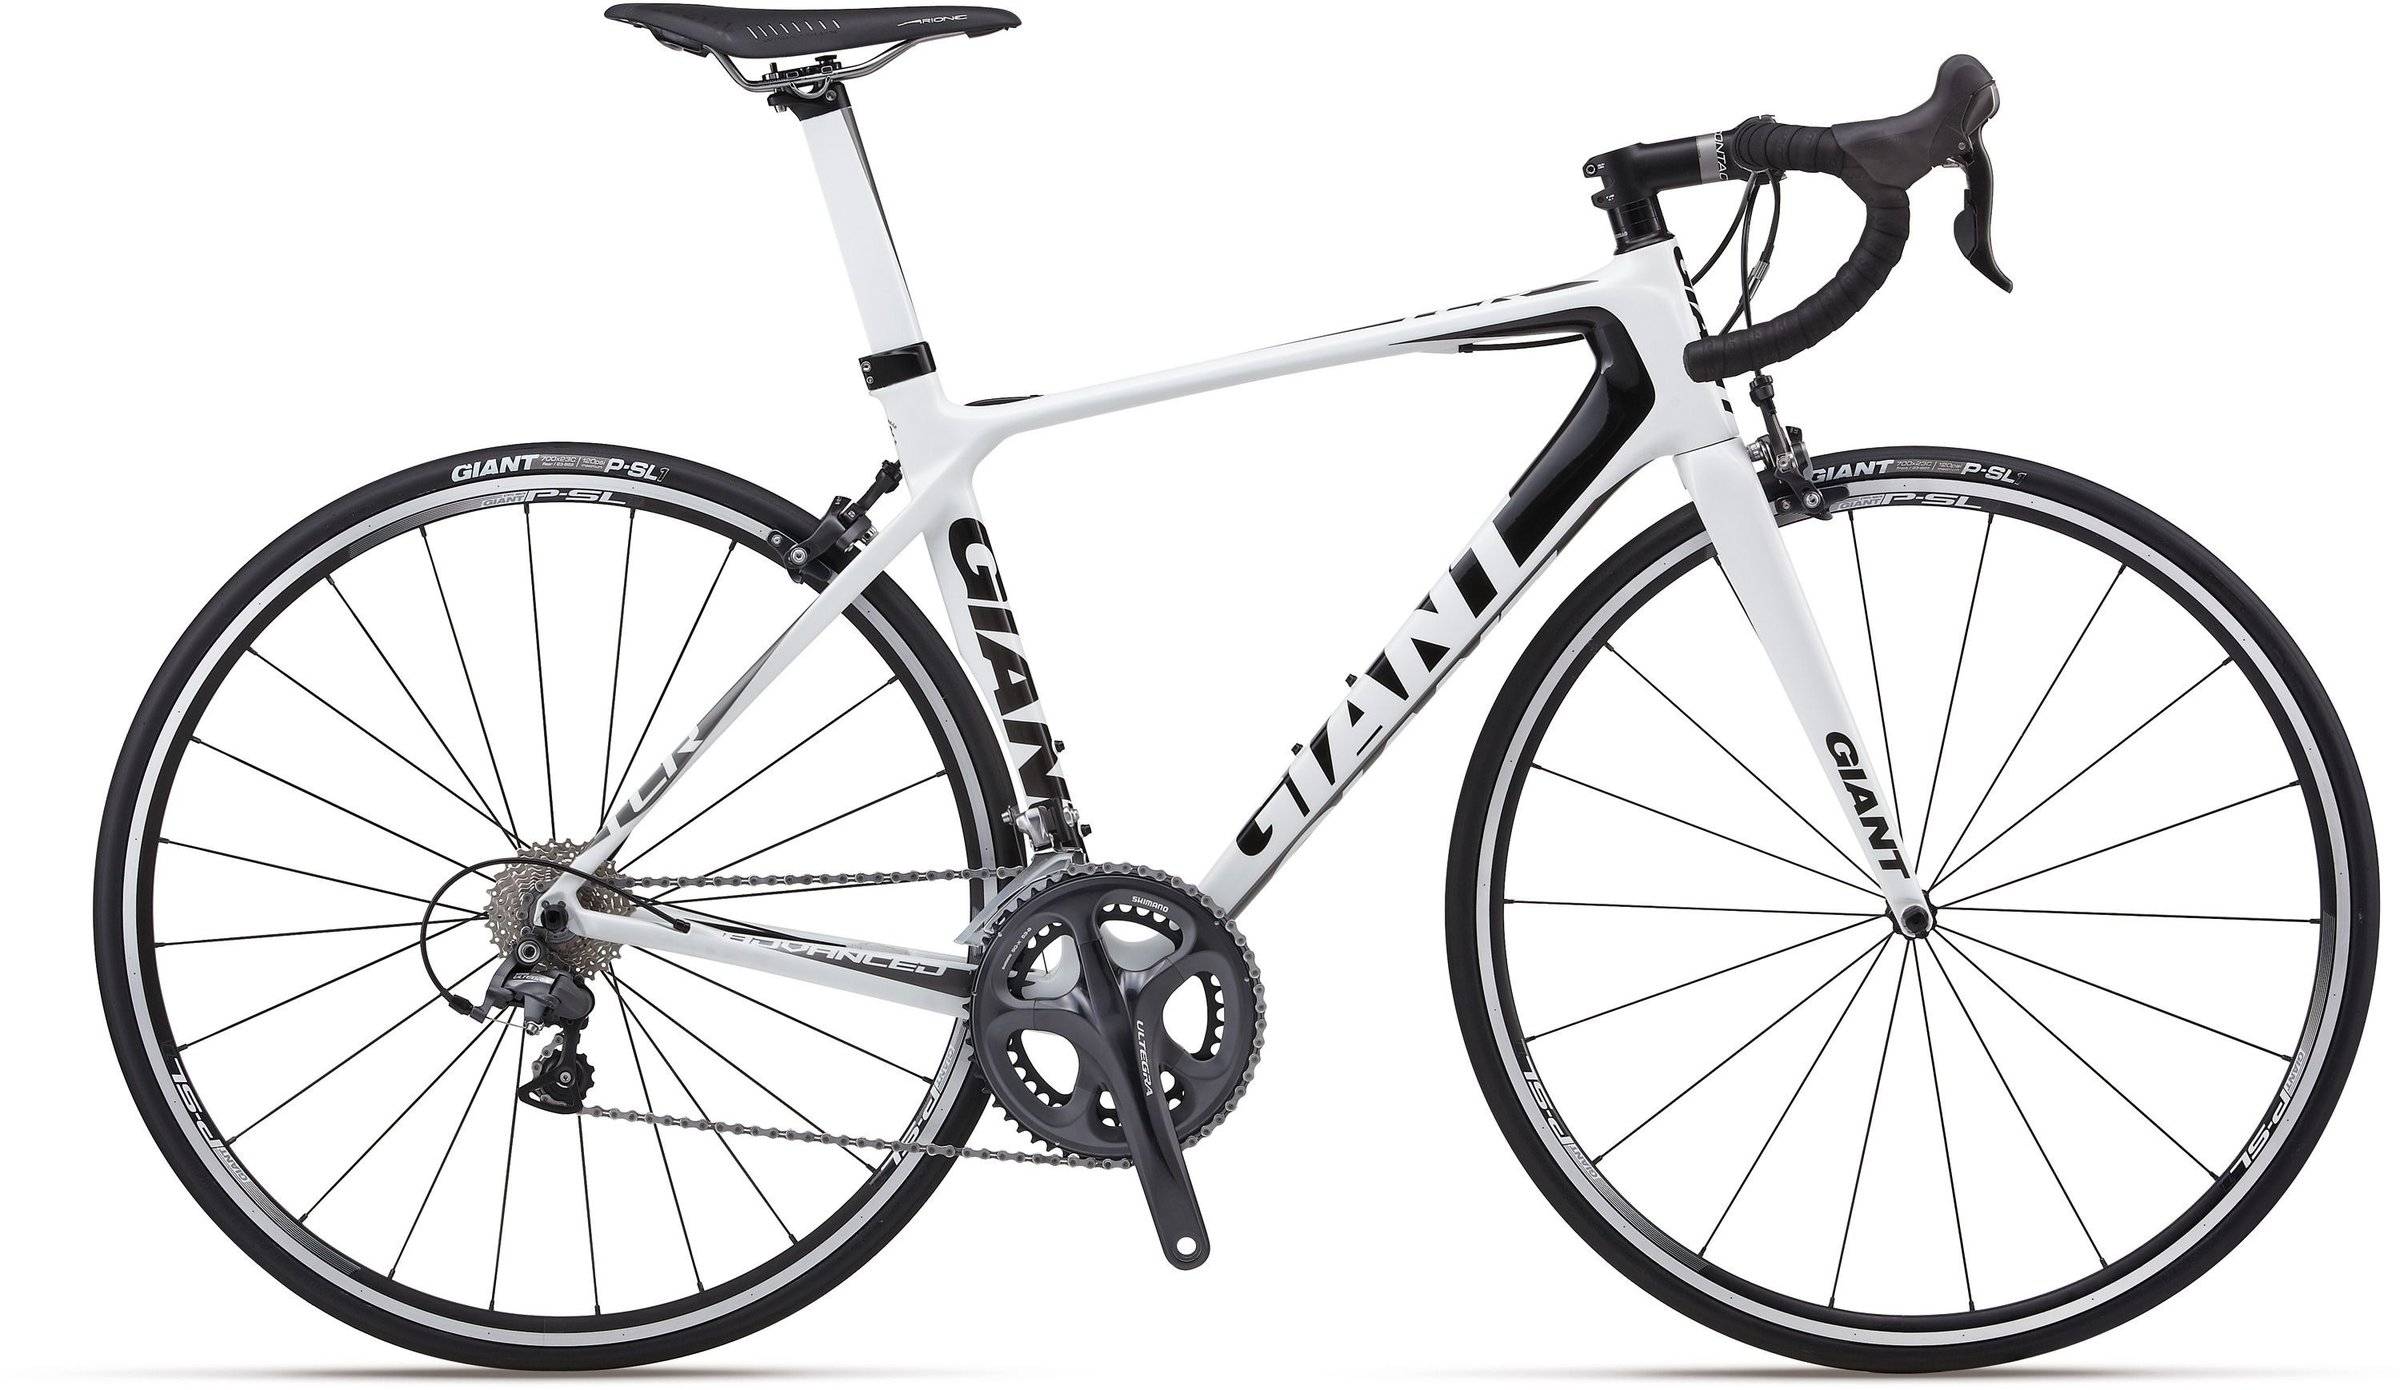 2012 Giant TCR Advanced 2 - Bicycle 